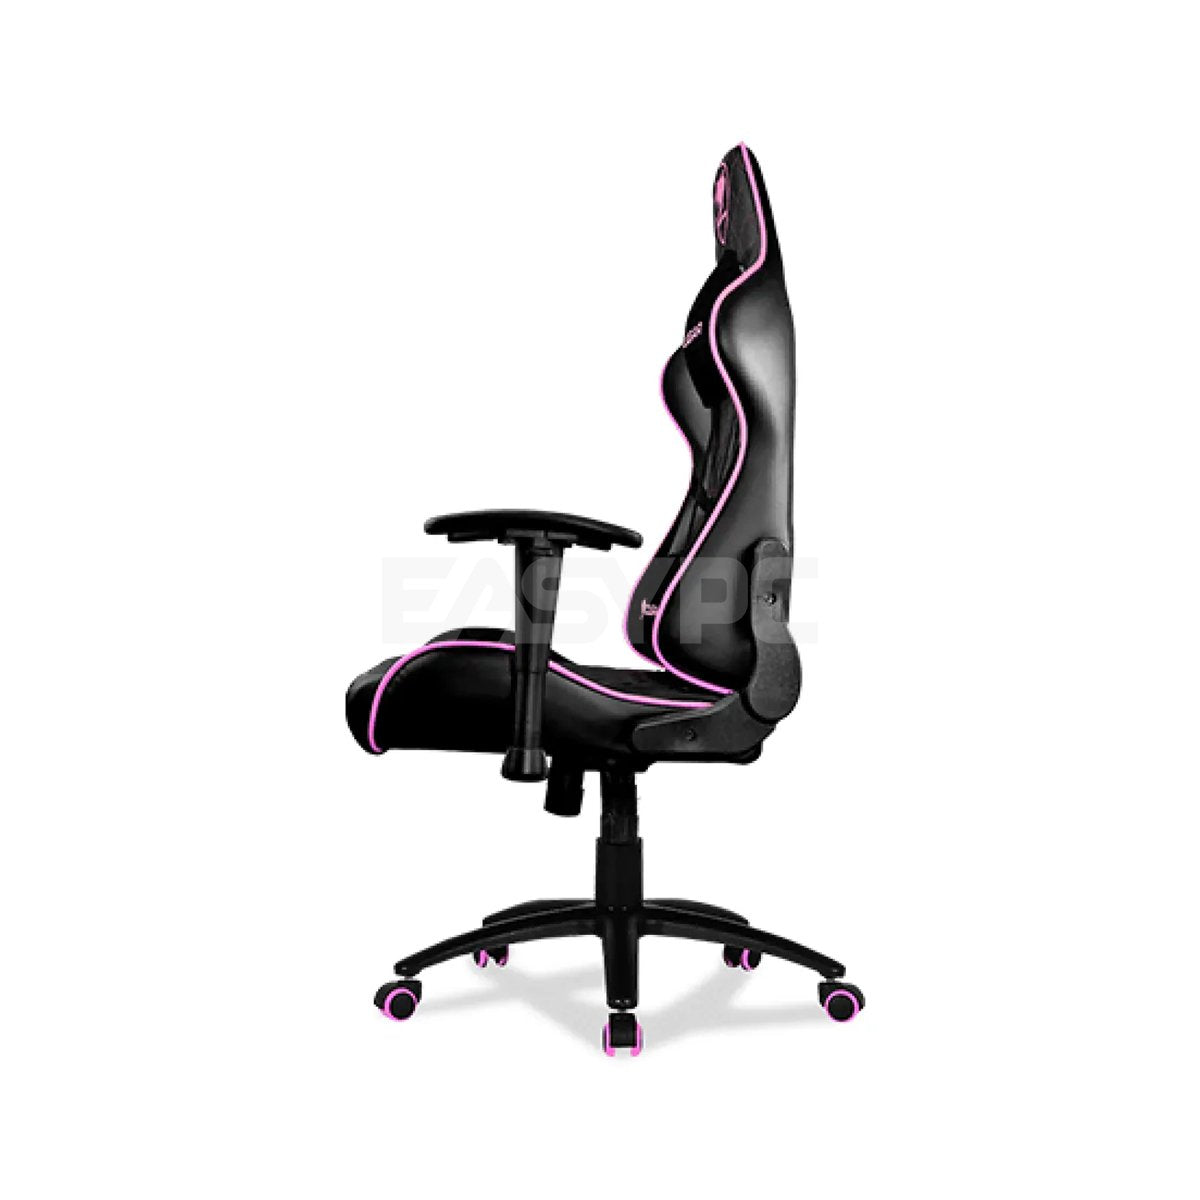 Cougar Armor One Gaming Chair Black pink-b